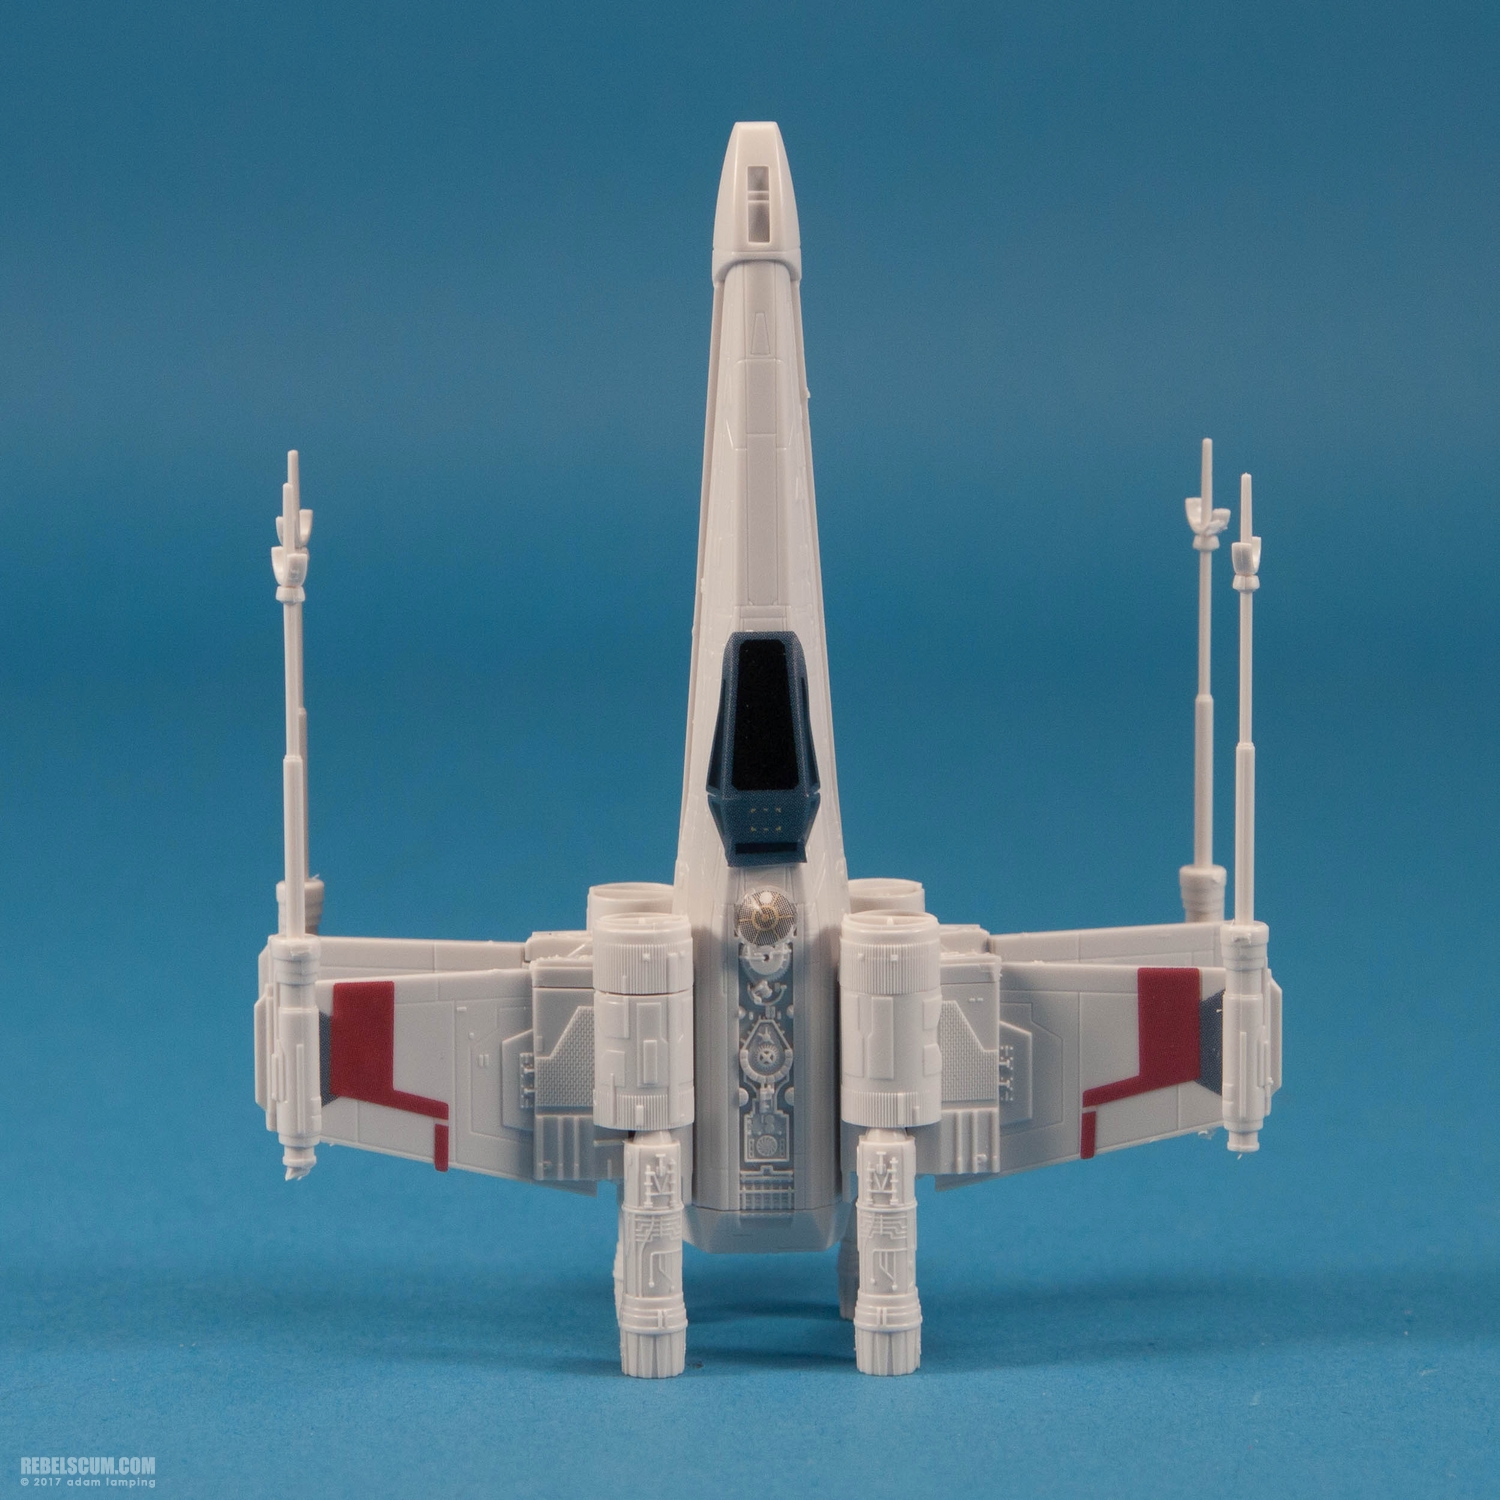 bandai-red-squadron-x-wing-starfighter-scale-model-kit-021.jpg